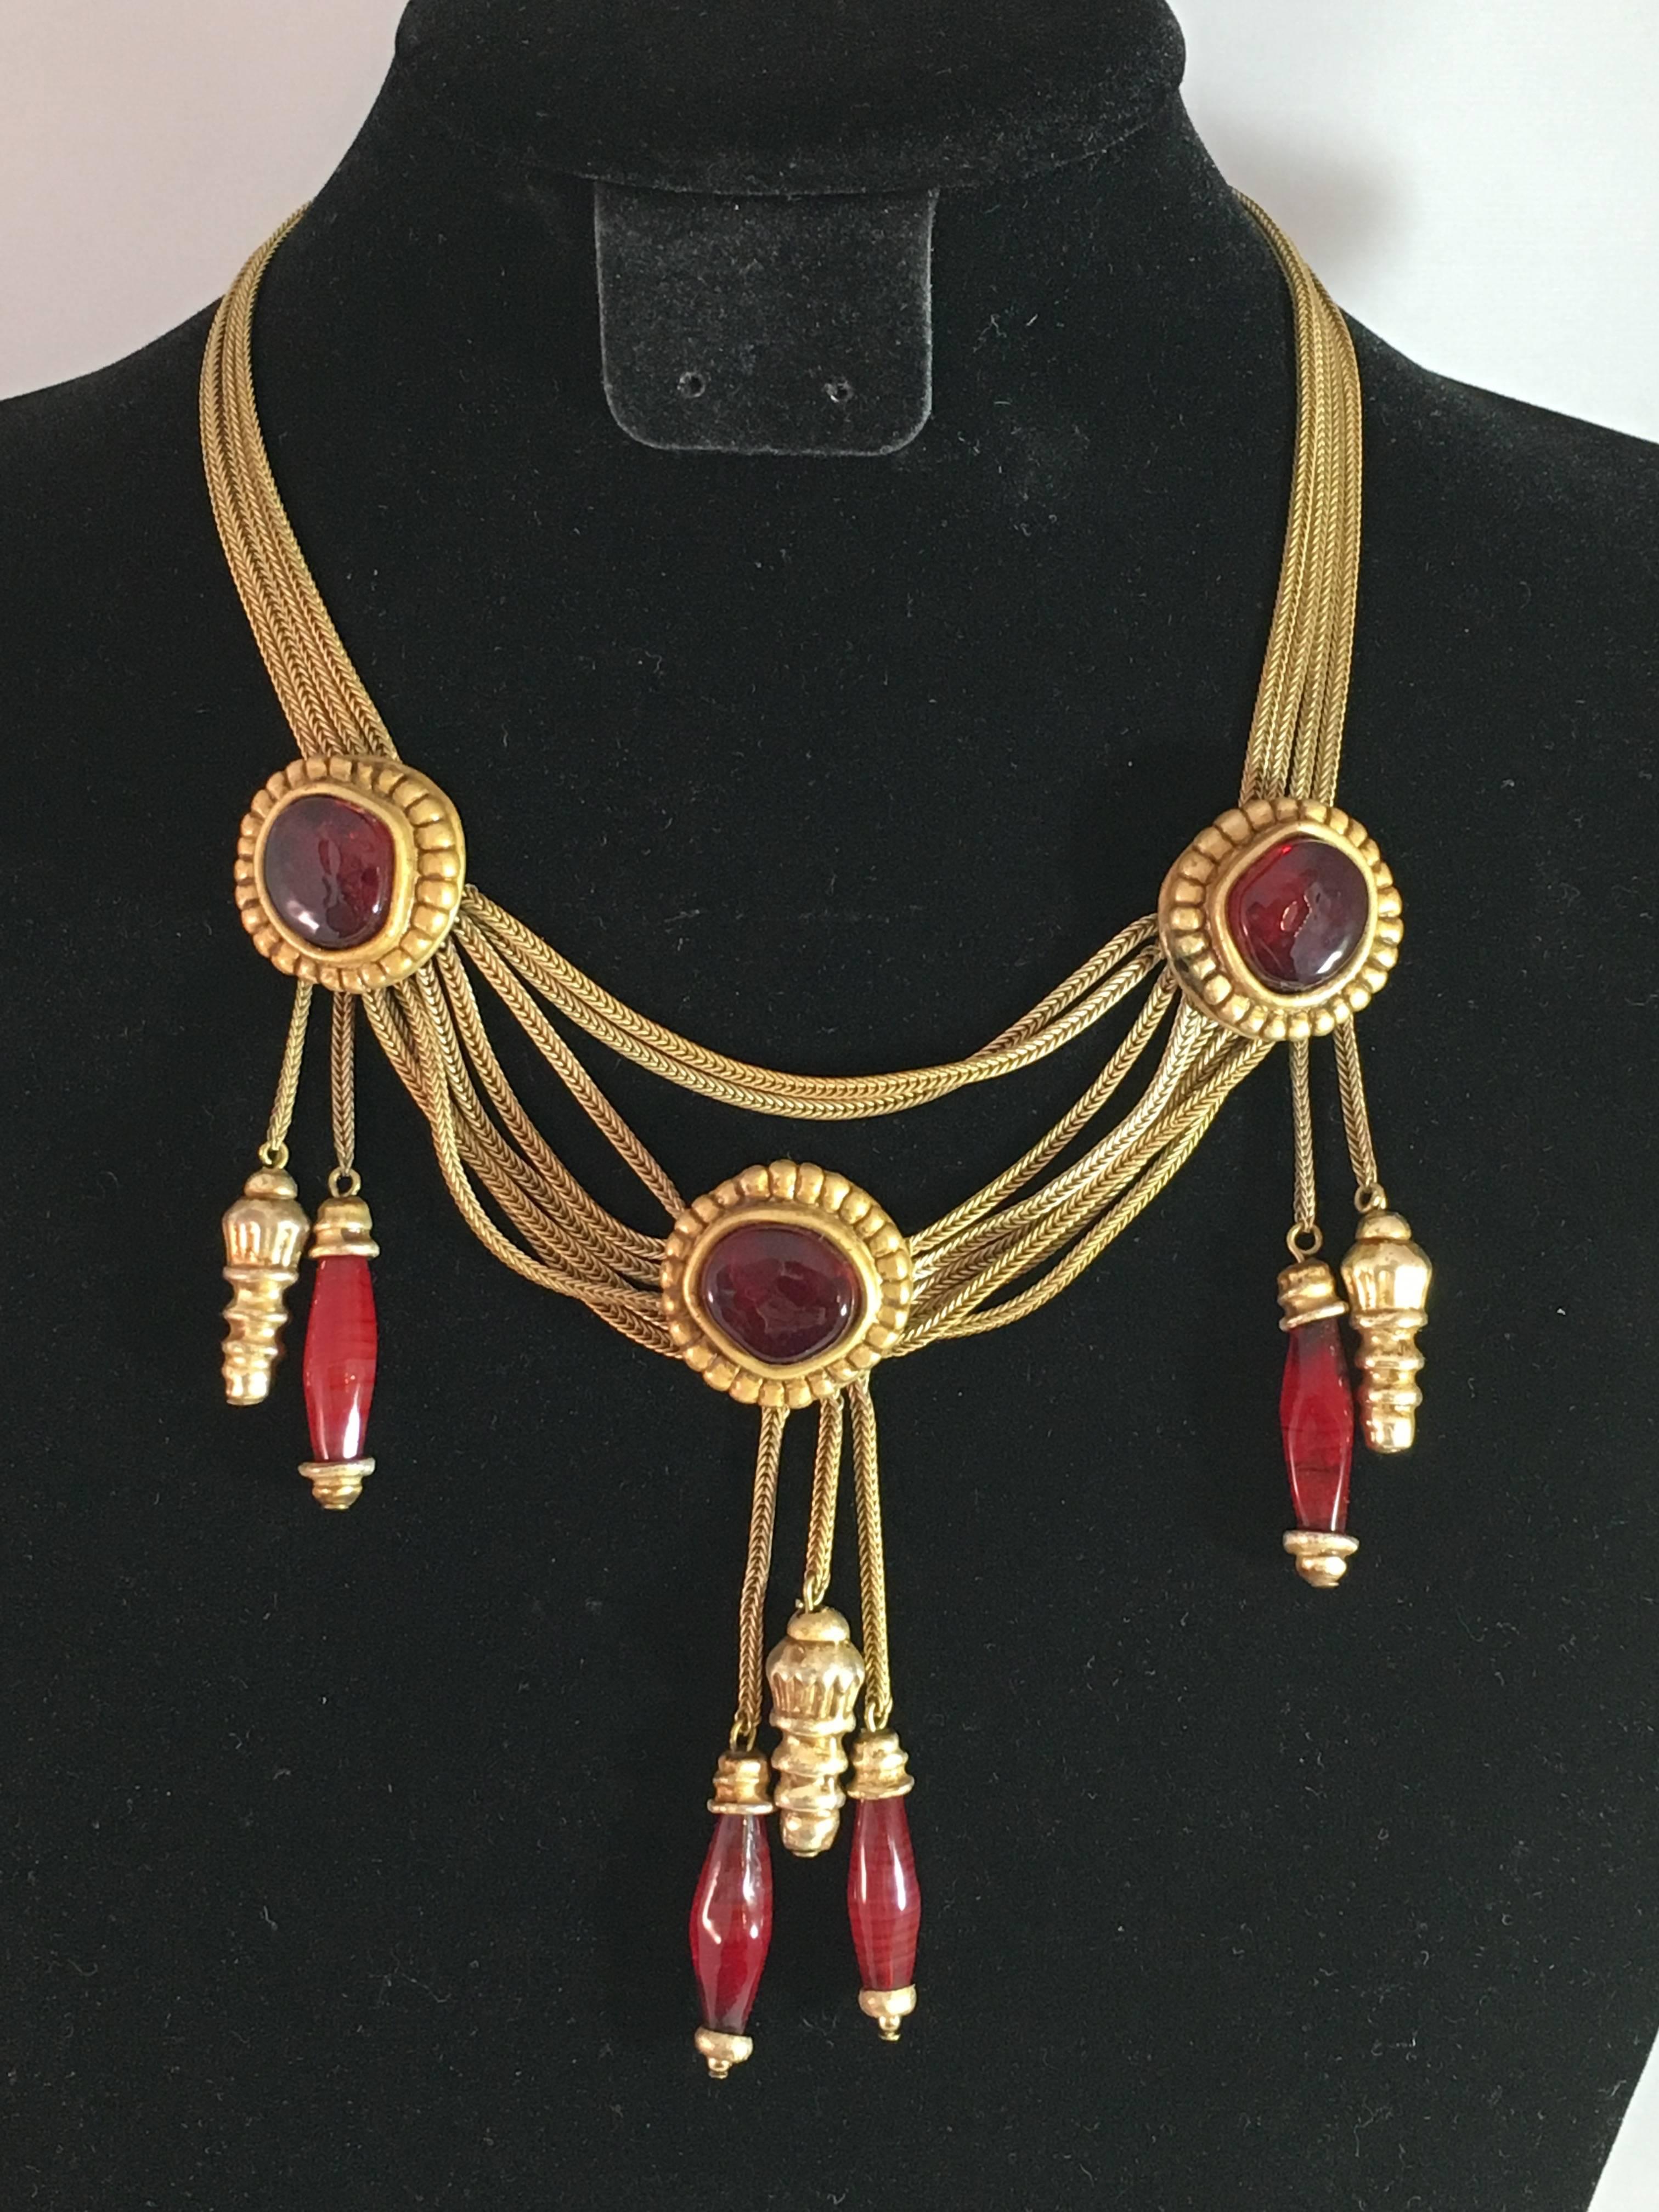 This is an amazing 1980s Christian Dior Boutique necklace with dark red gripoix glass medallions and hanging gripoix glass beads. The necklace measures 16" and is made up of multiple goldtone chains and three gripoix glass medallions with oval